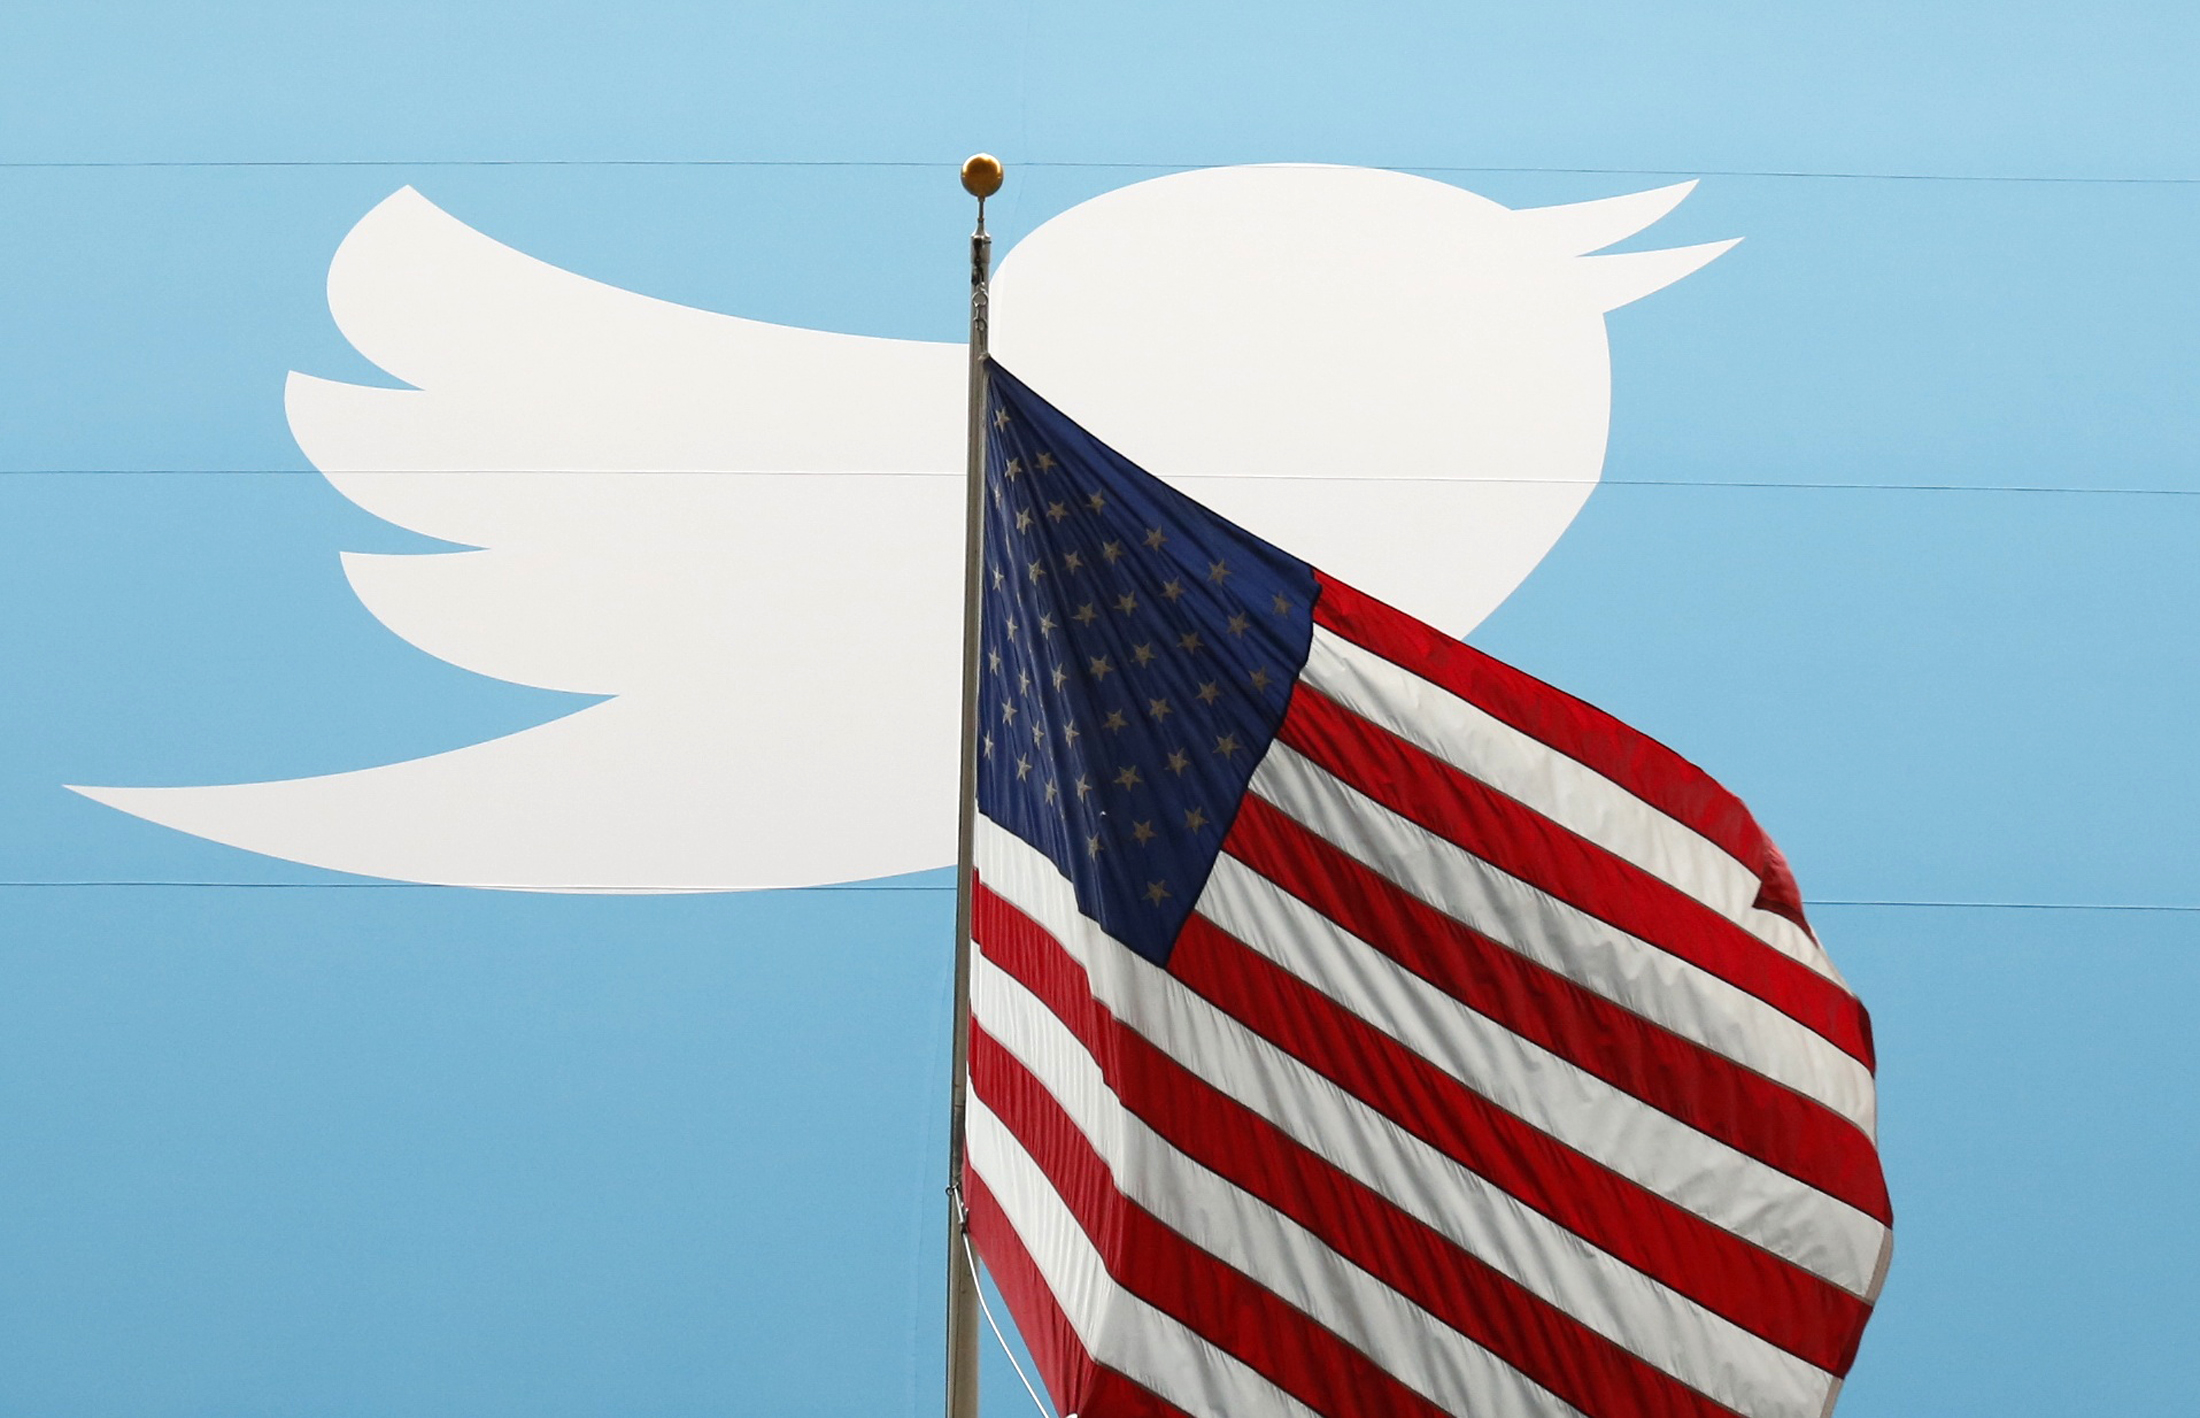 The Twitter Inc. logo is shown with the U.S. flag during the company's IPO on the floor of the New York Stock Exchange in New York